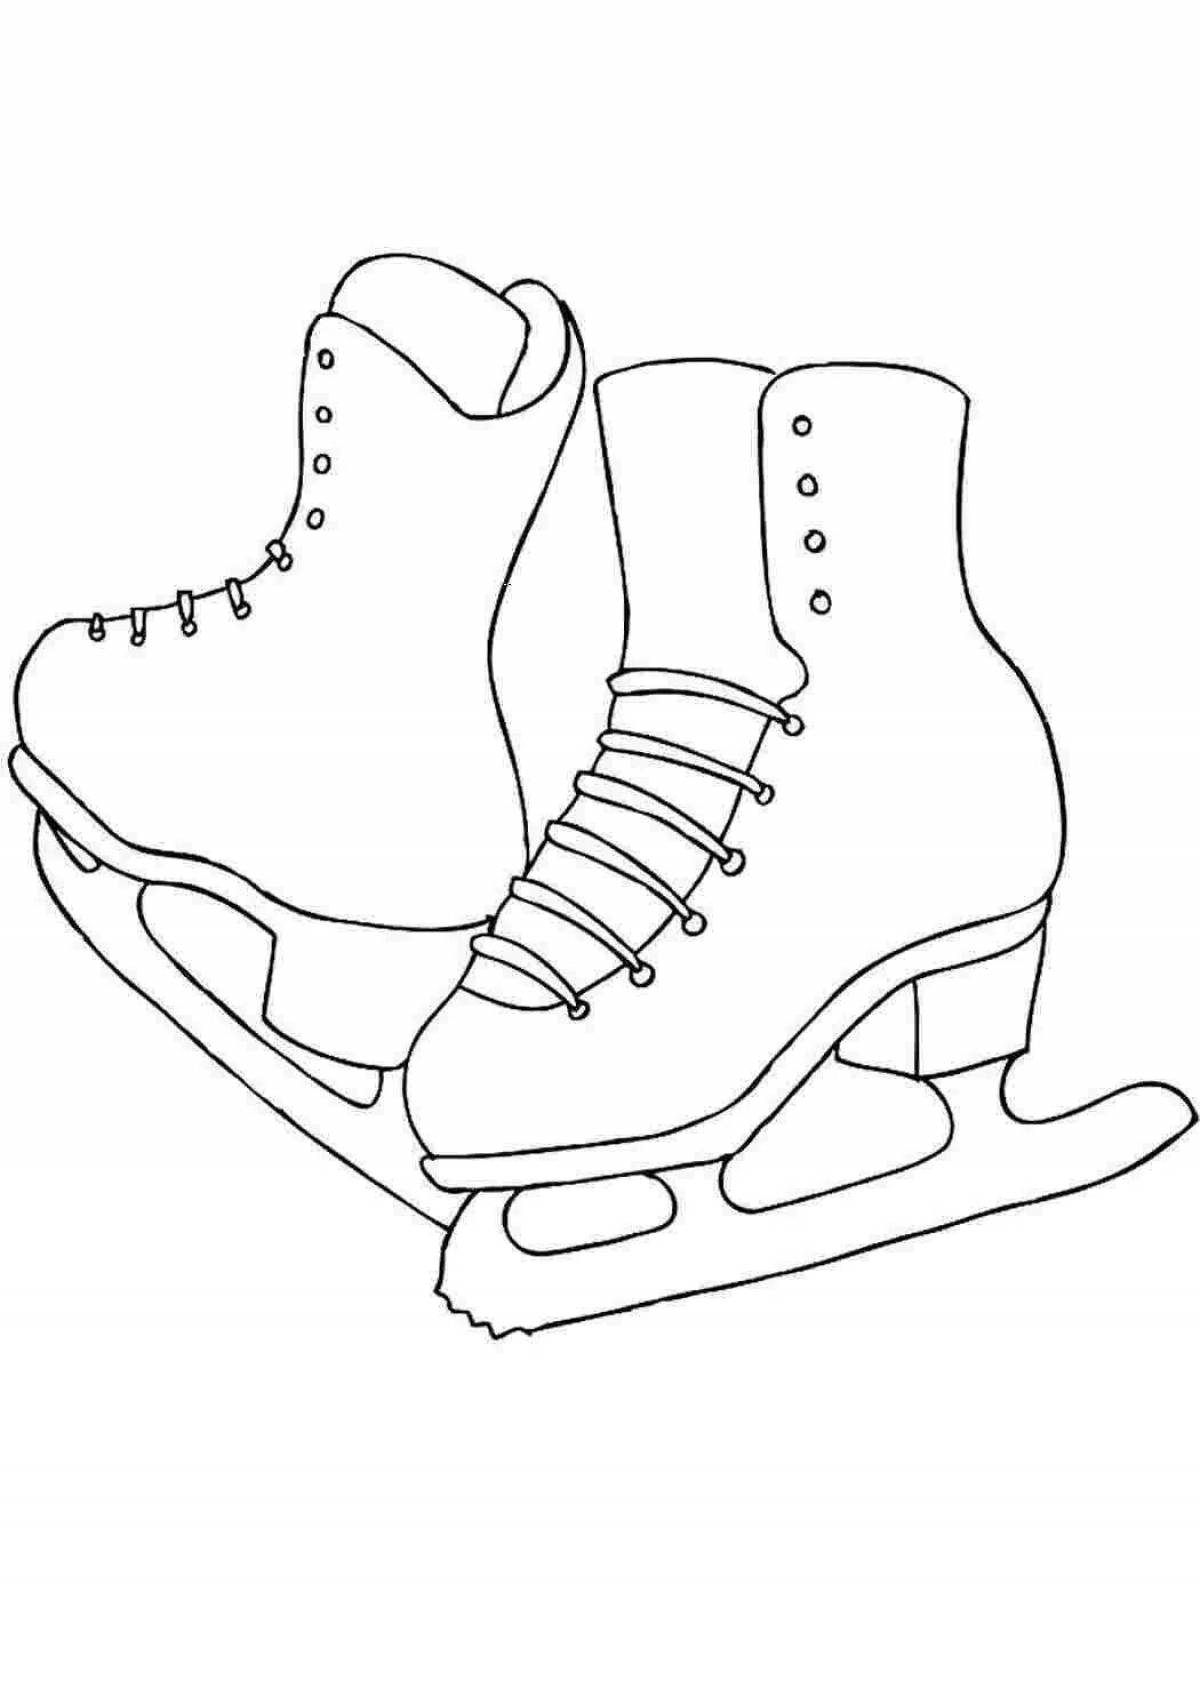 Colorful skates for children 3-4 years old